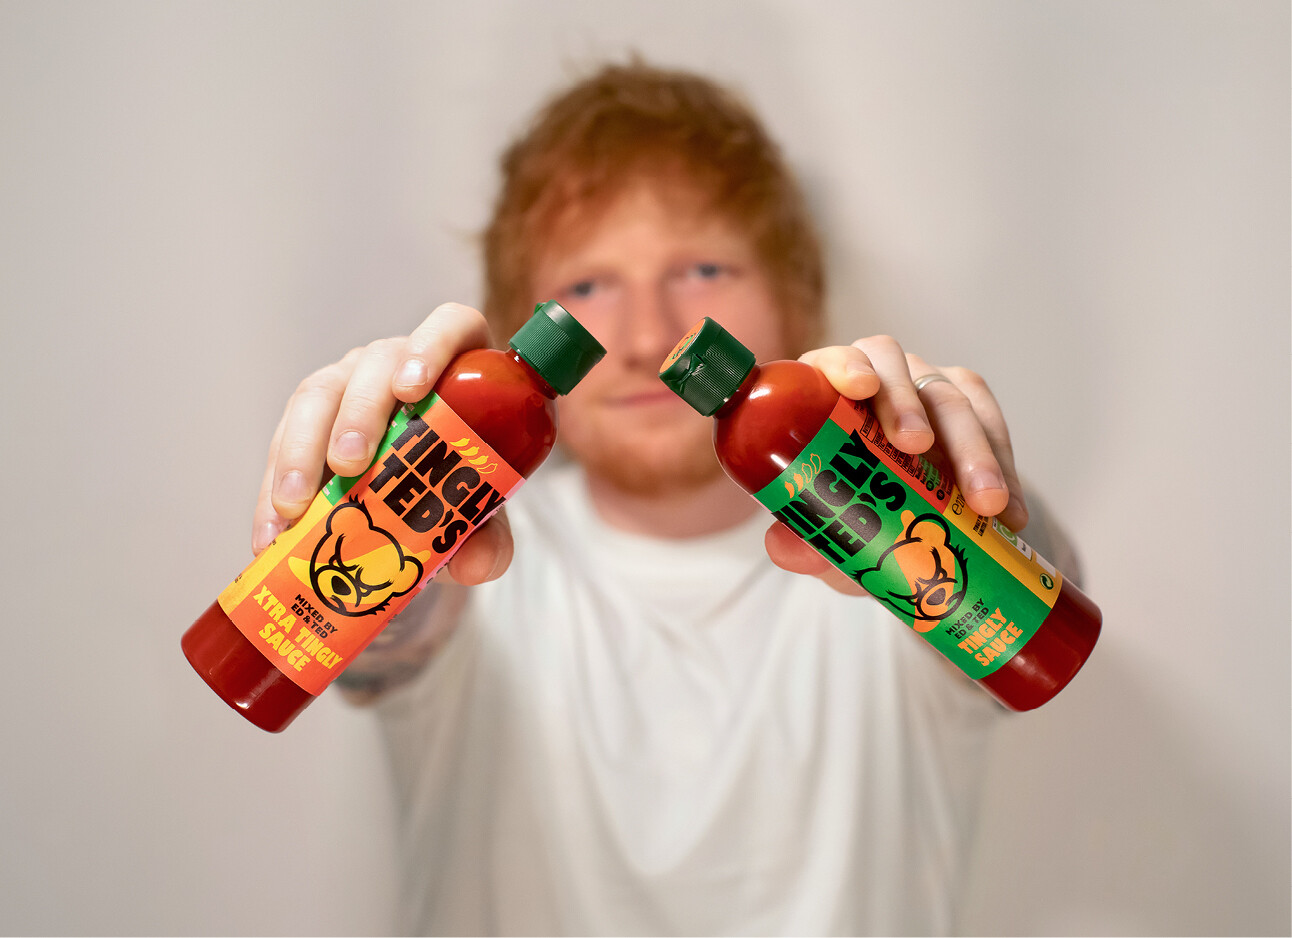 Tingly Ted's hot sauce